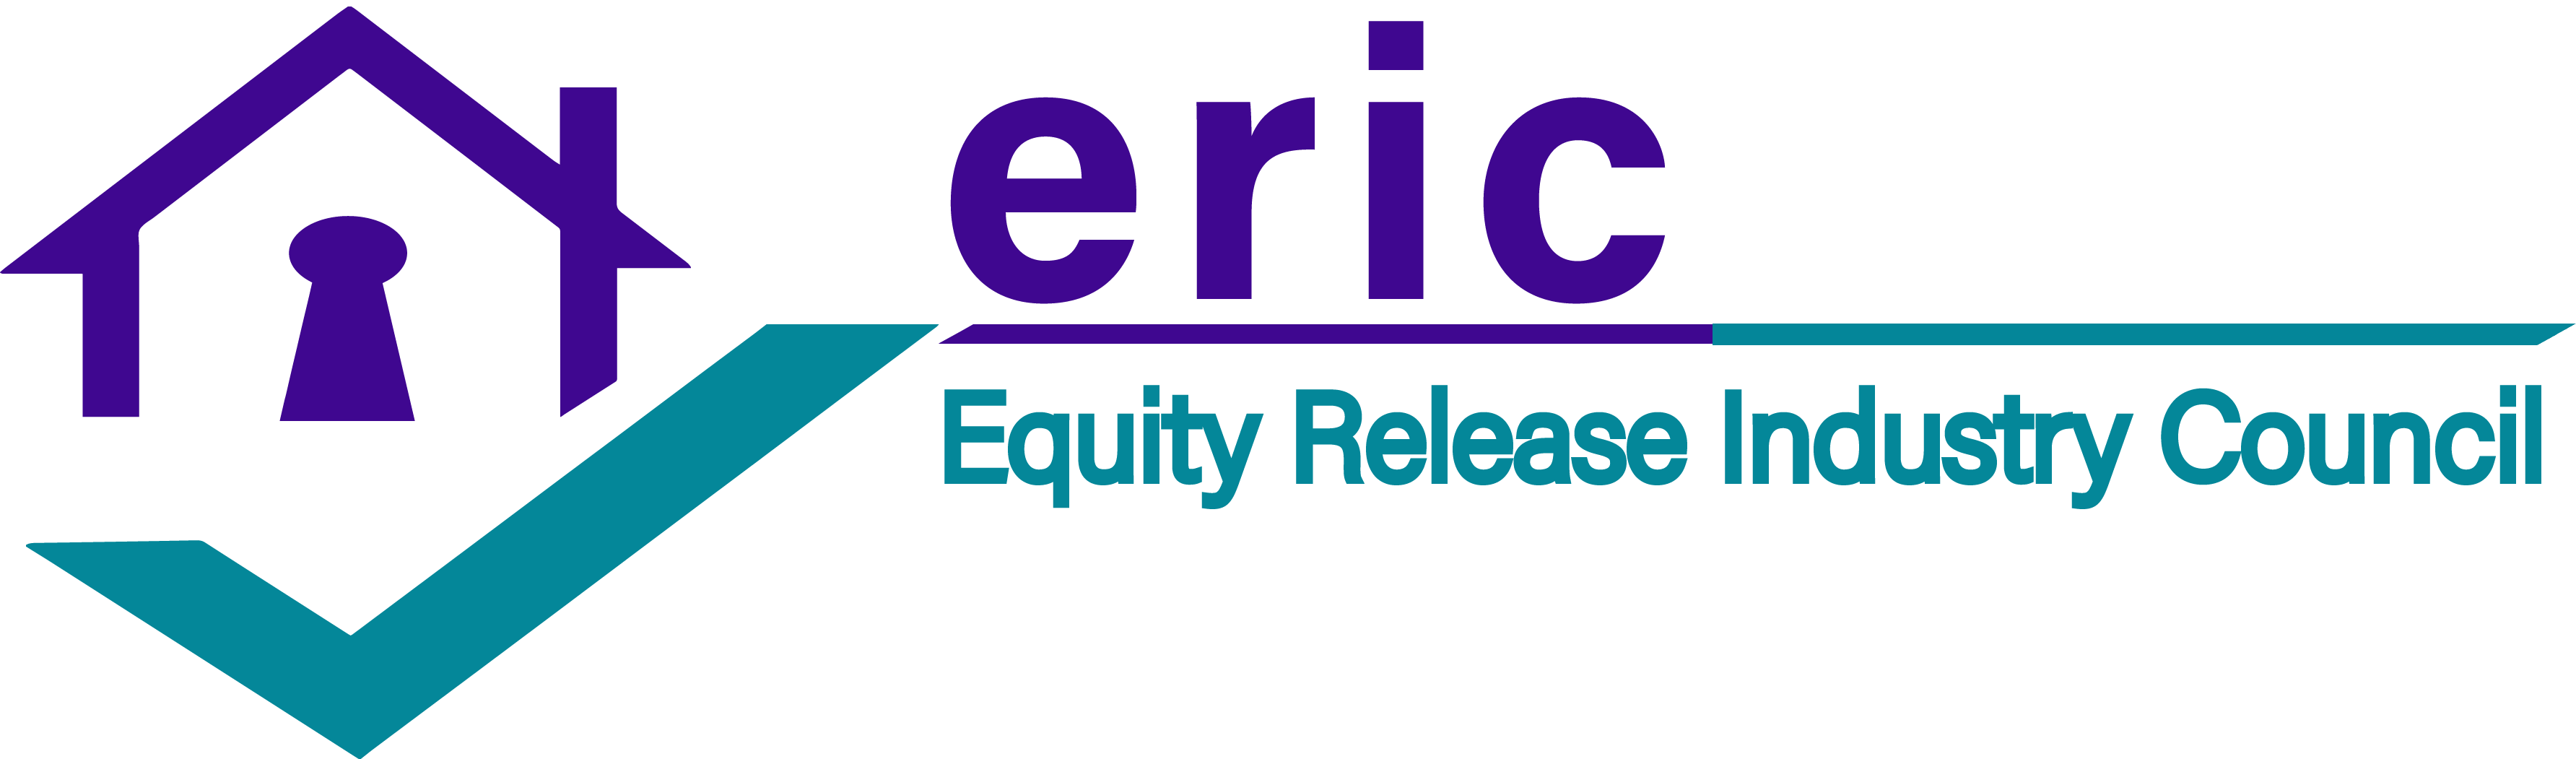 Equity Release Industry Council